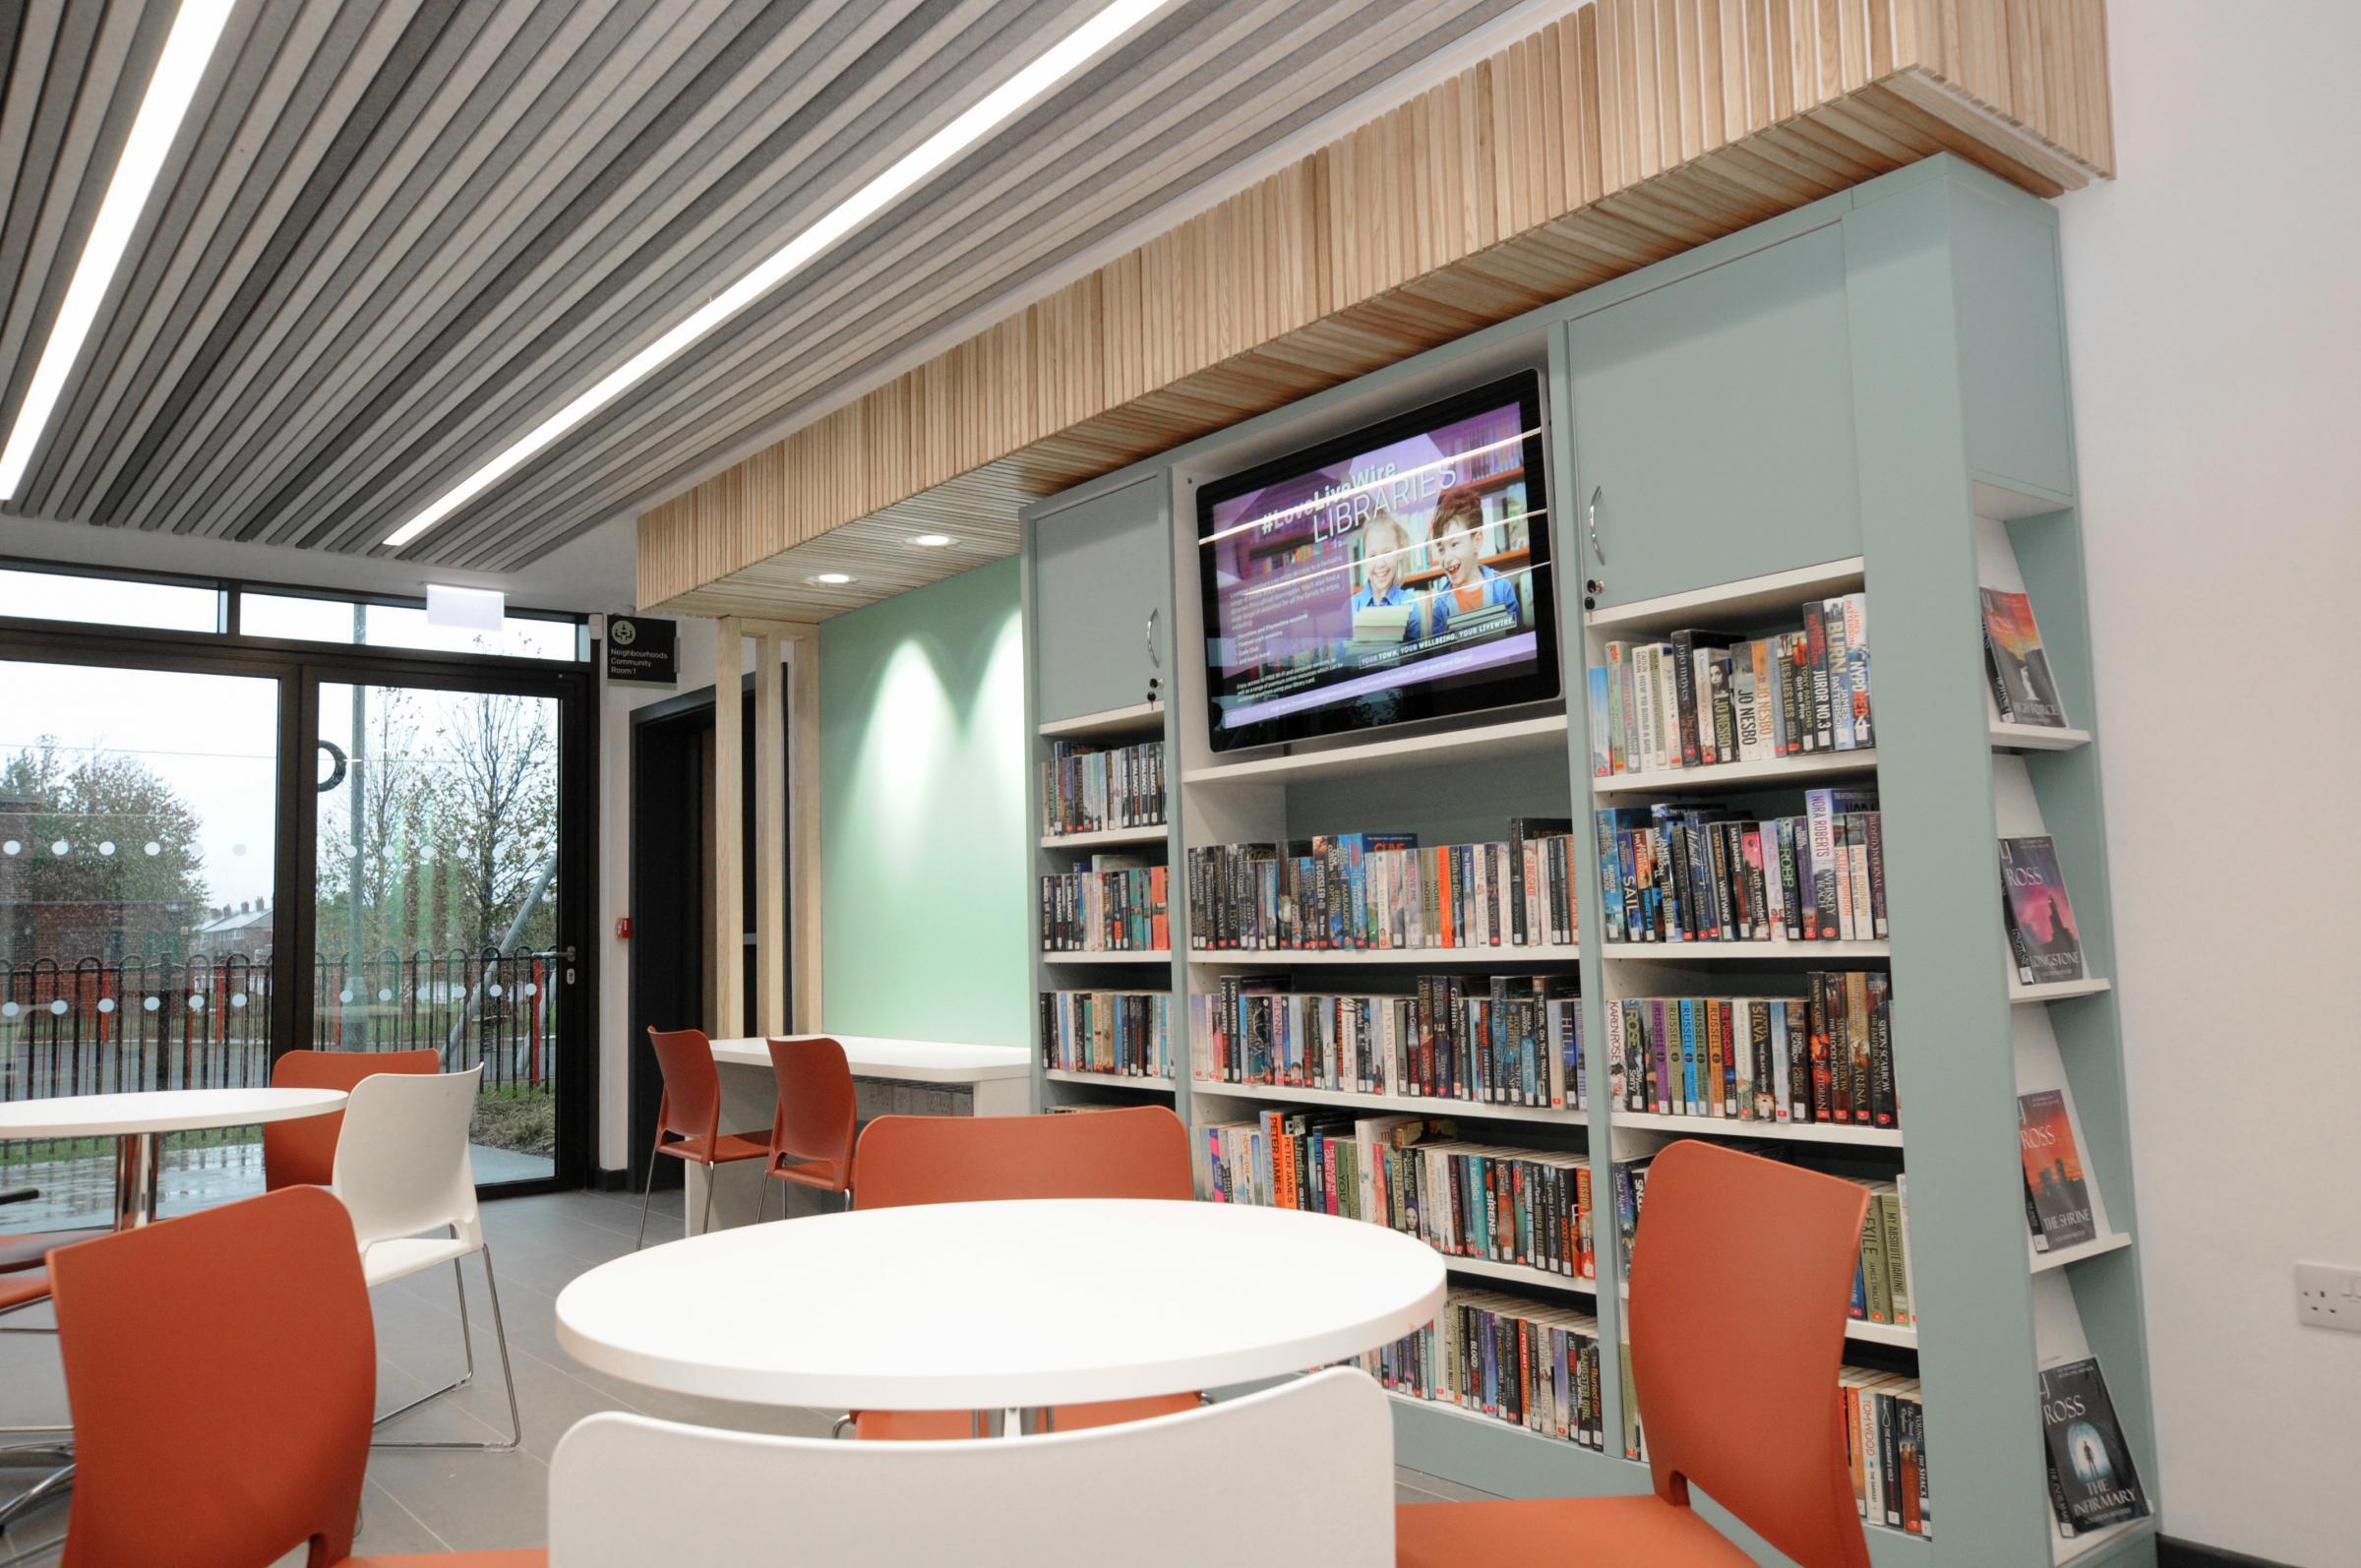 Library services are also operated by LiveWire